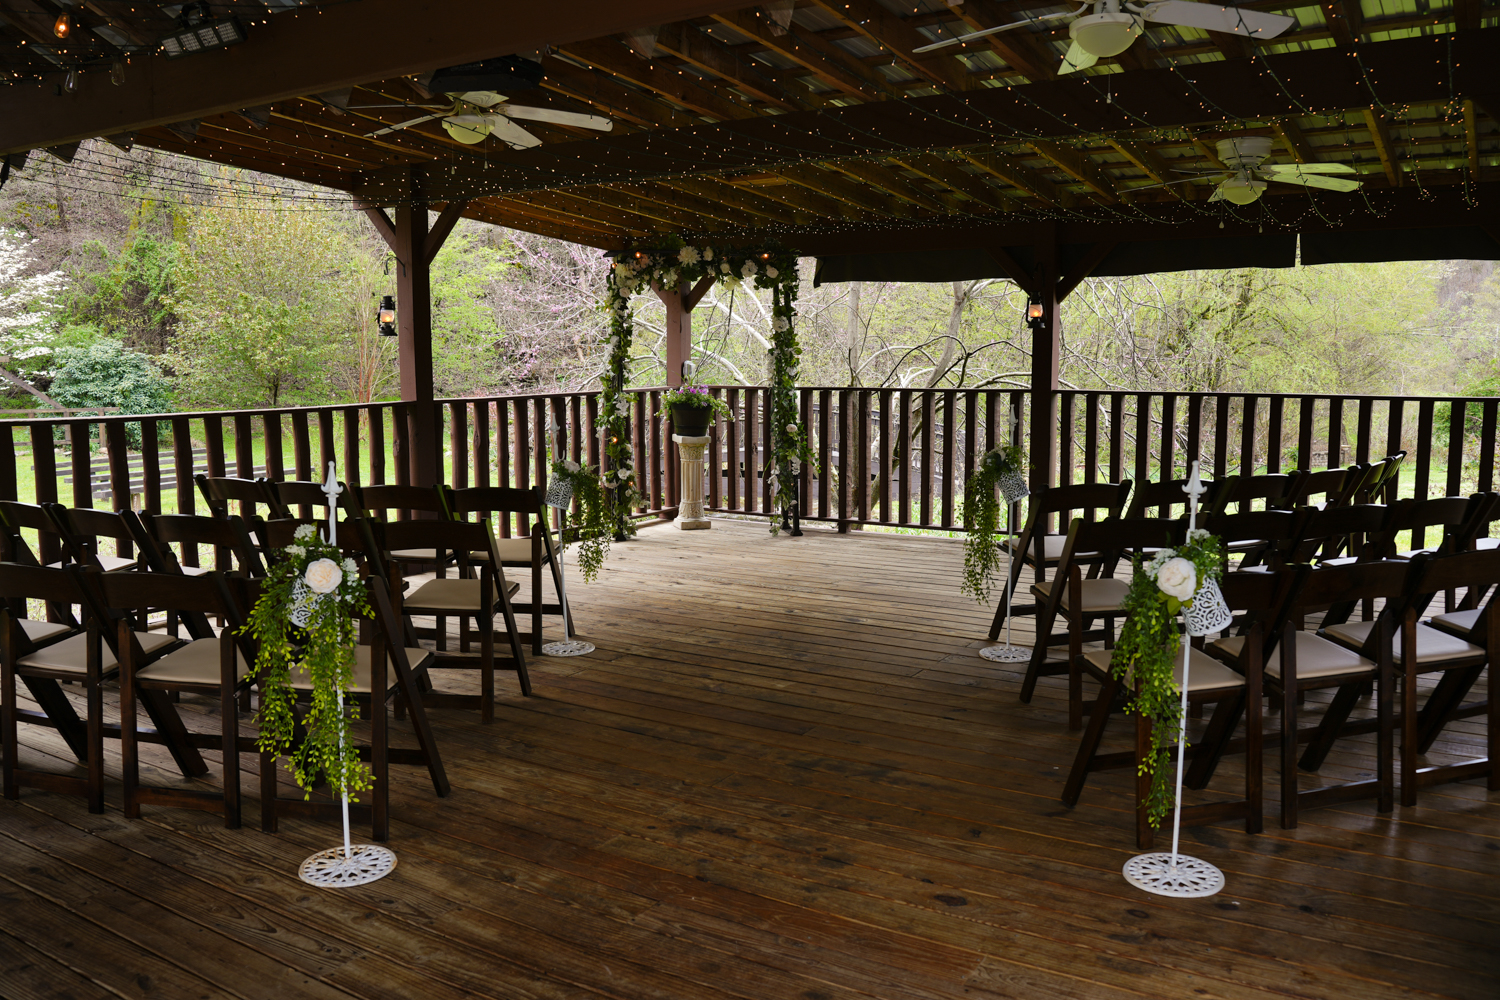 Covered pavilion with dark brown wedding chairs